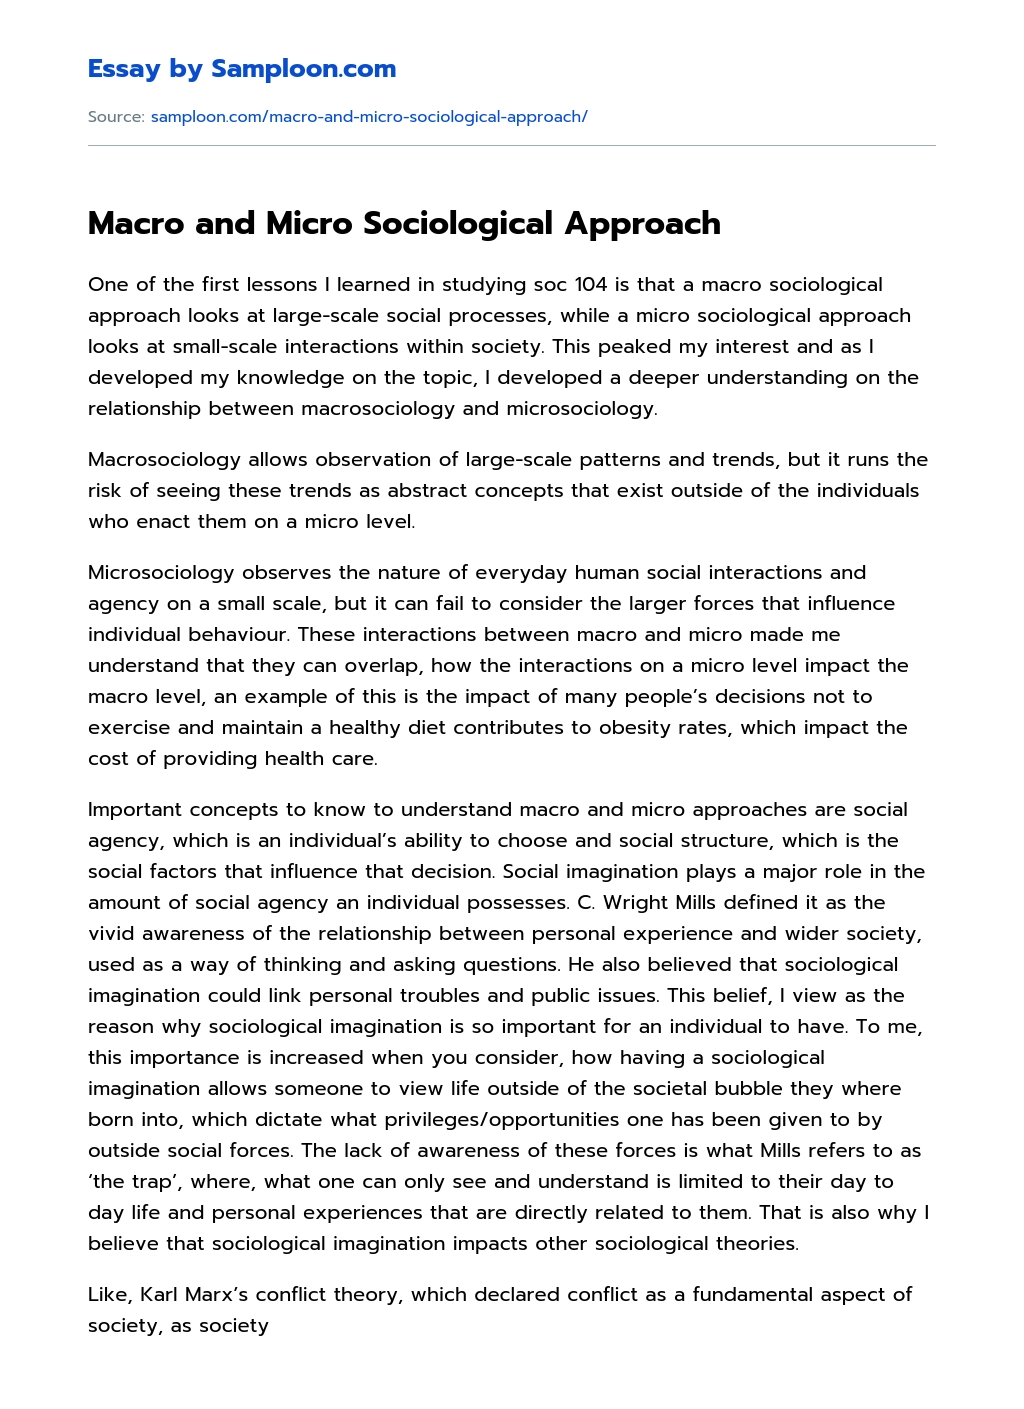 Macro and Micro Sociological Approach essay